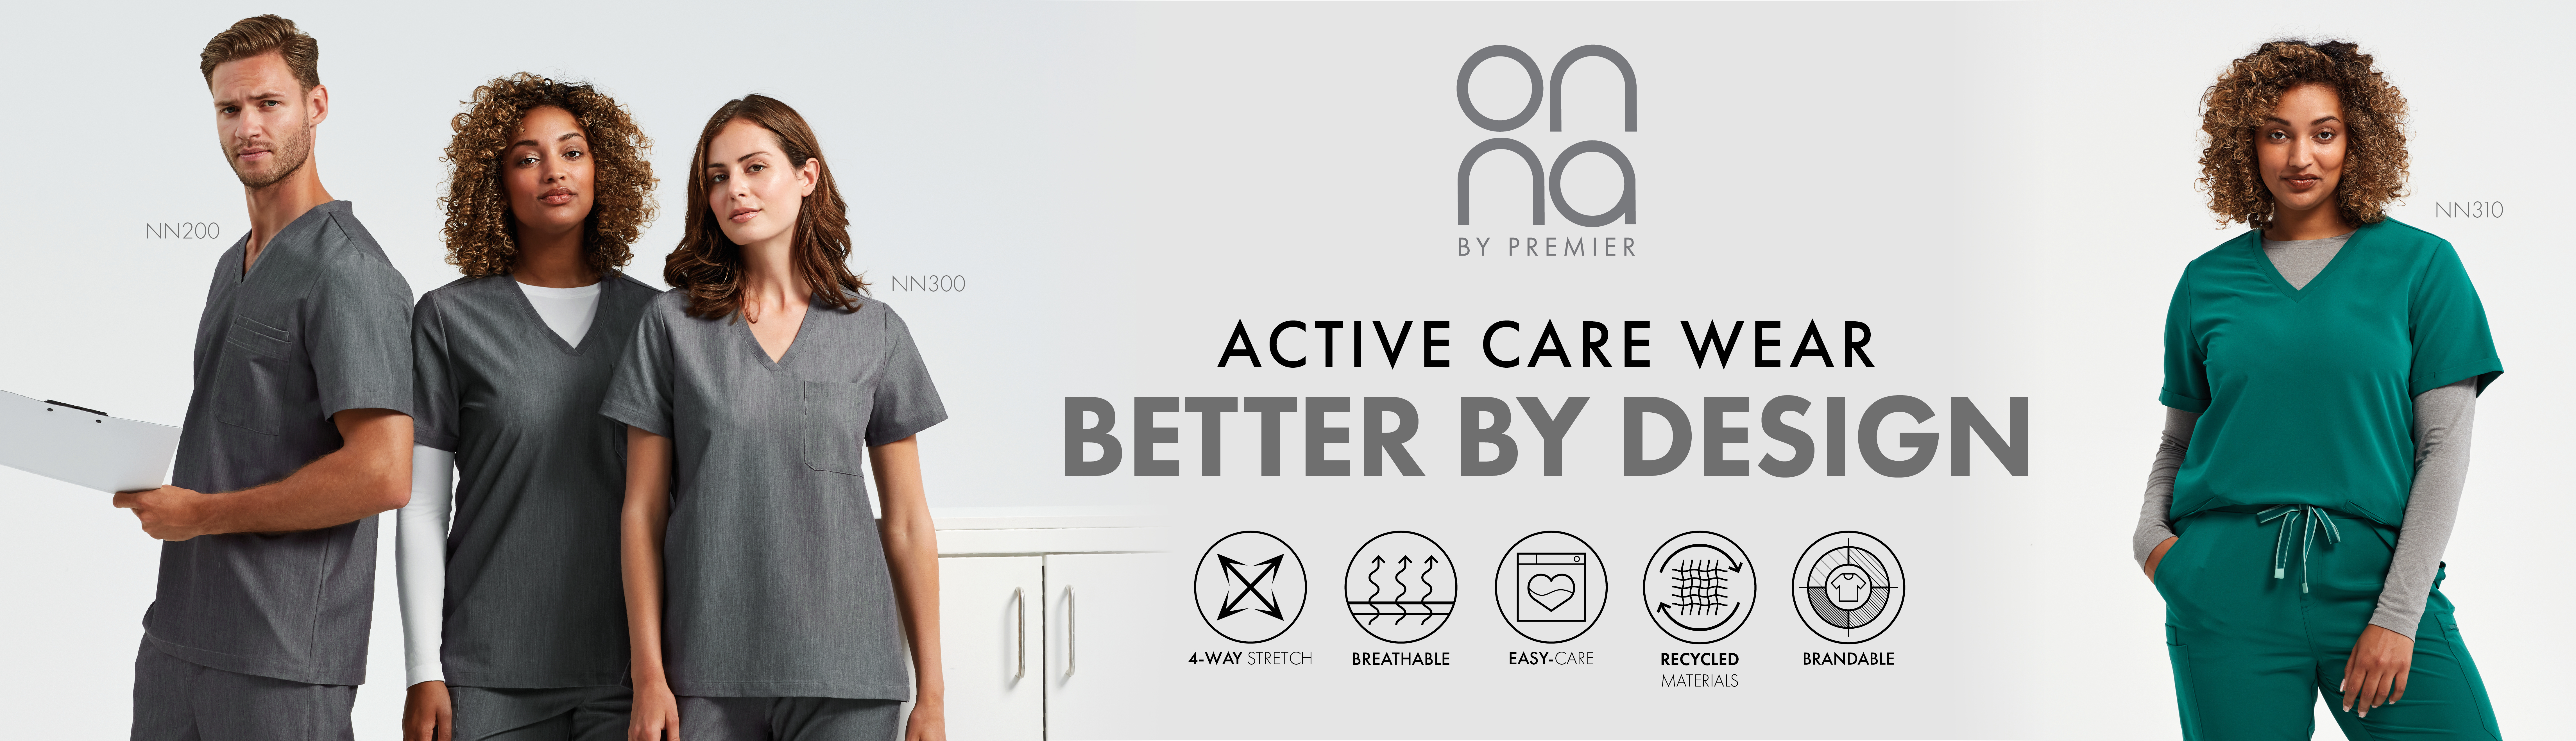 ONNA by Premier – Active care wear